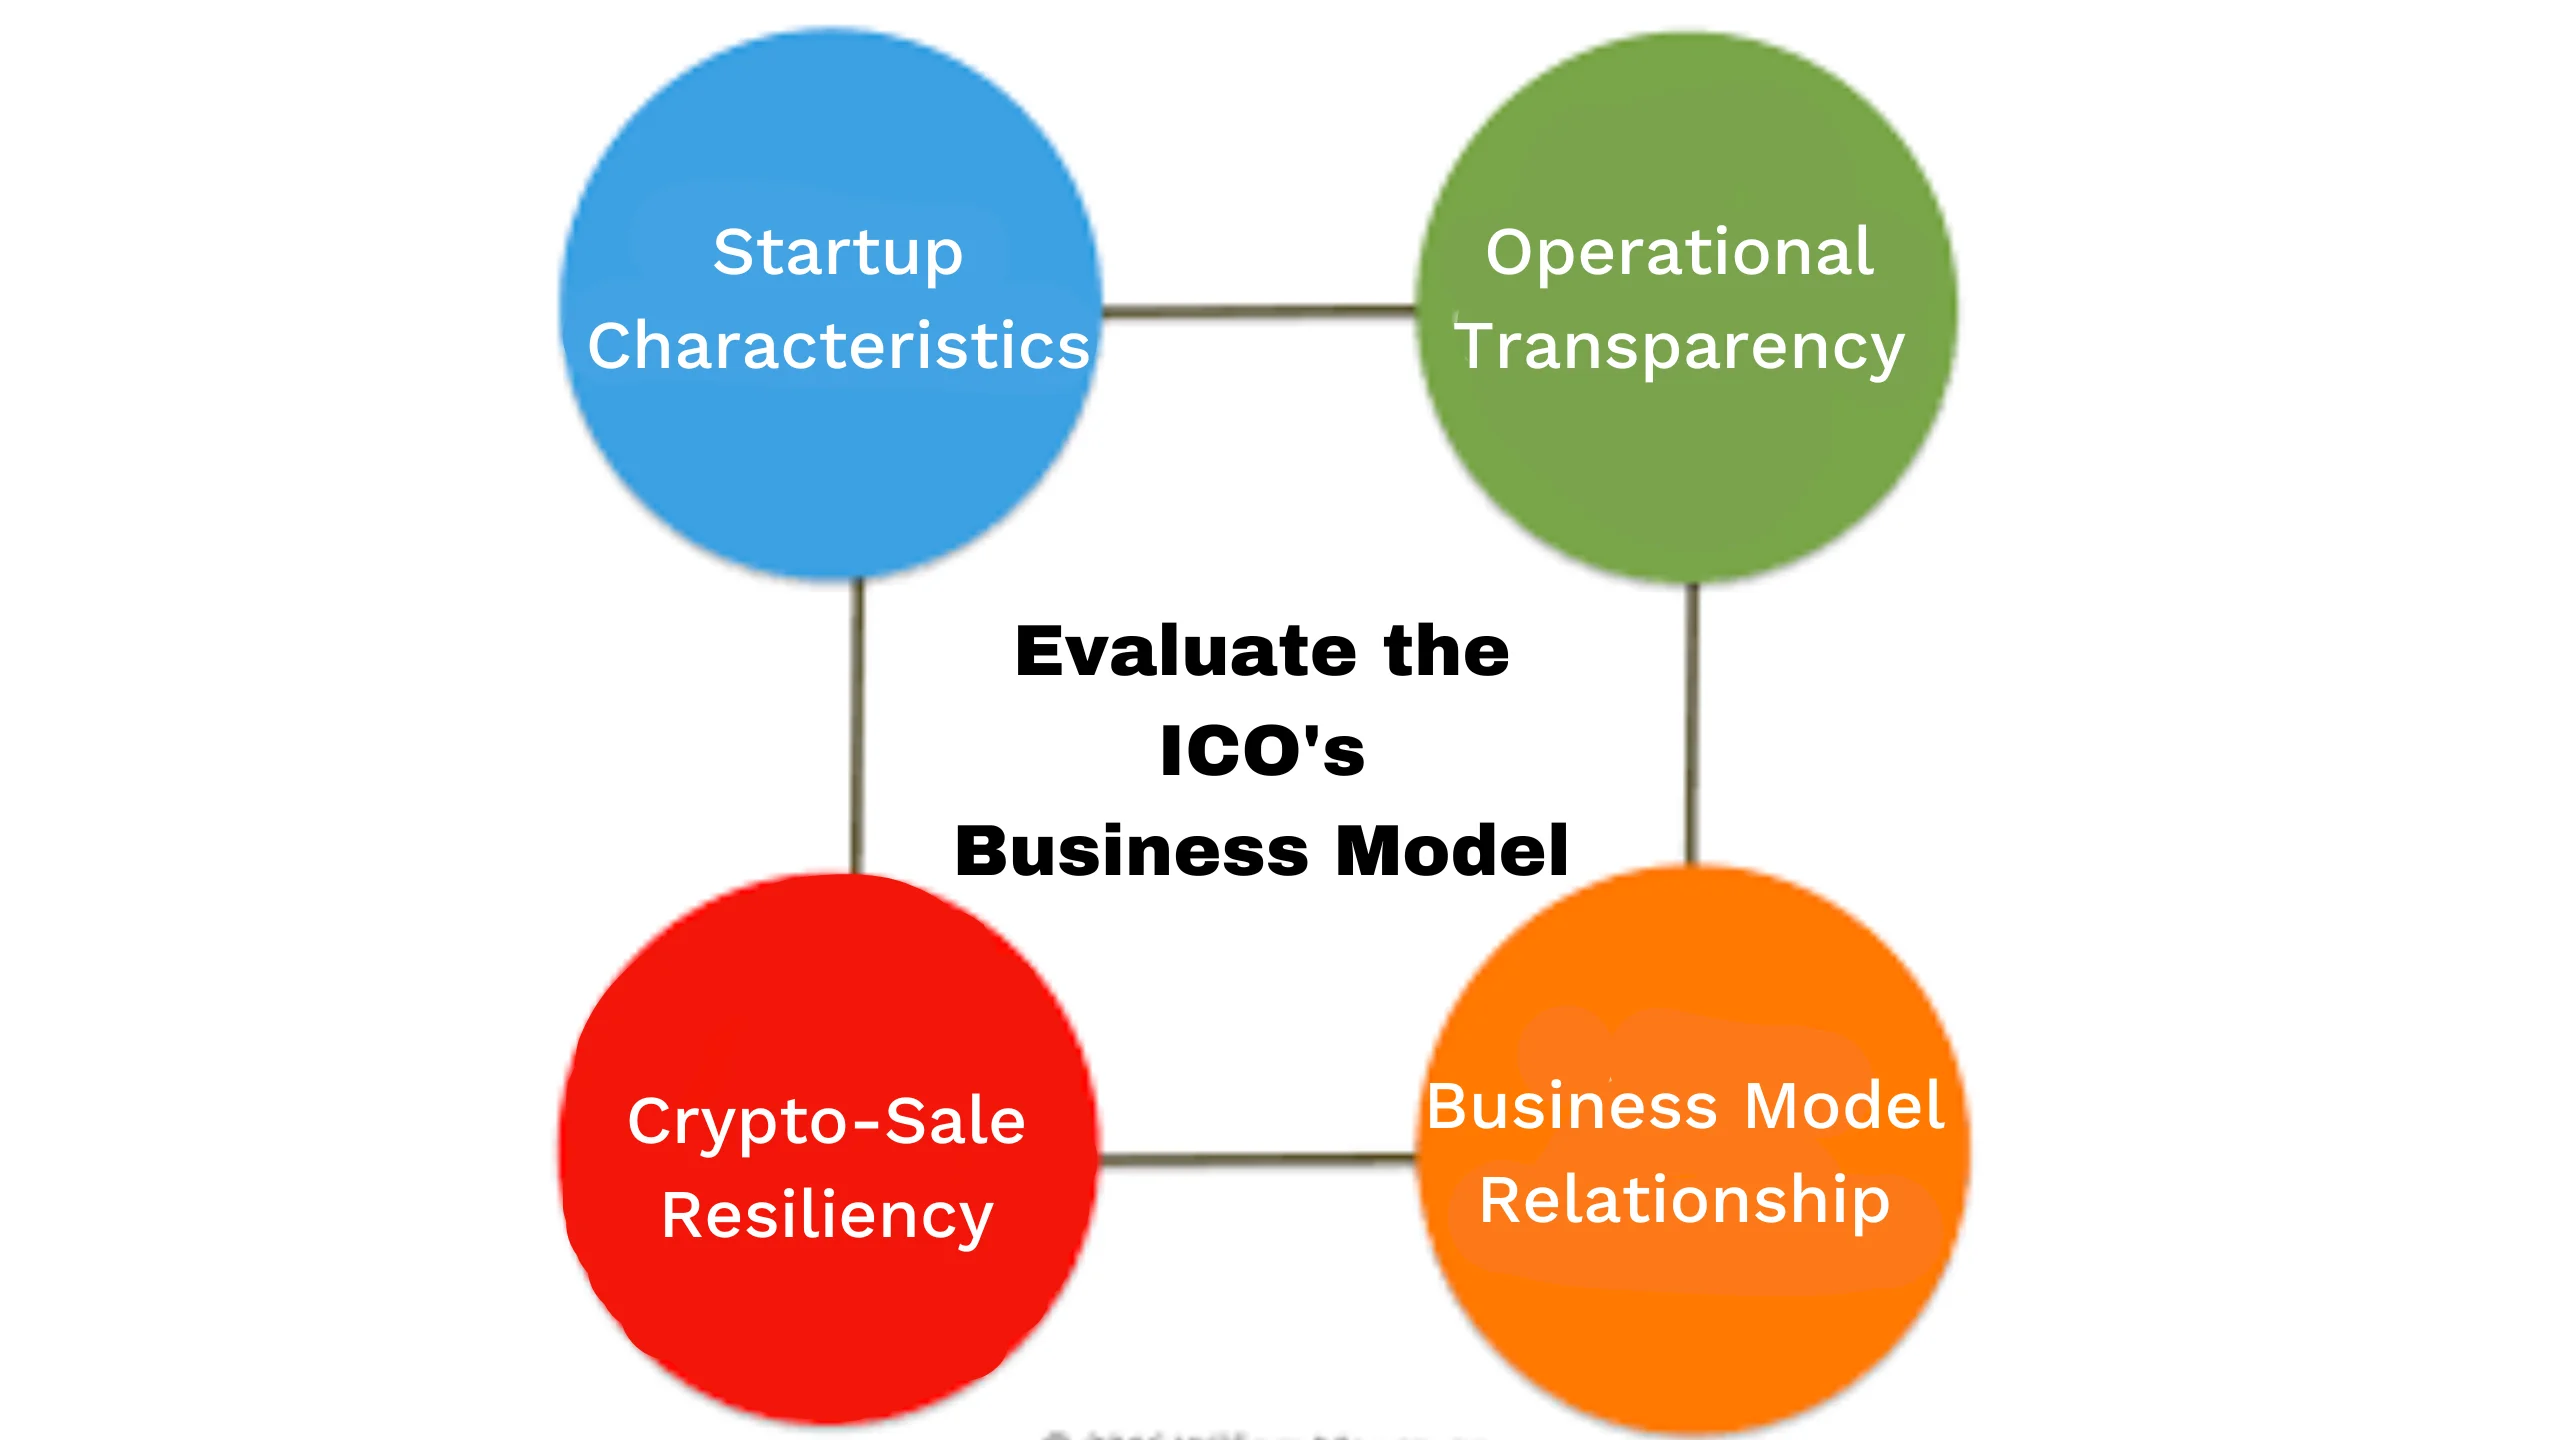 Evaluate the ICO's business model to ensure a thorough understanding of its structure and potential. Analyze key components such as market fit, revenue streams, and competitive advantages.